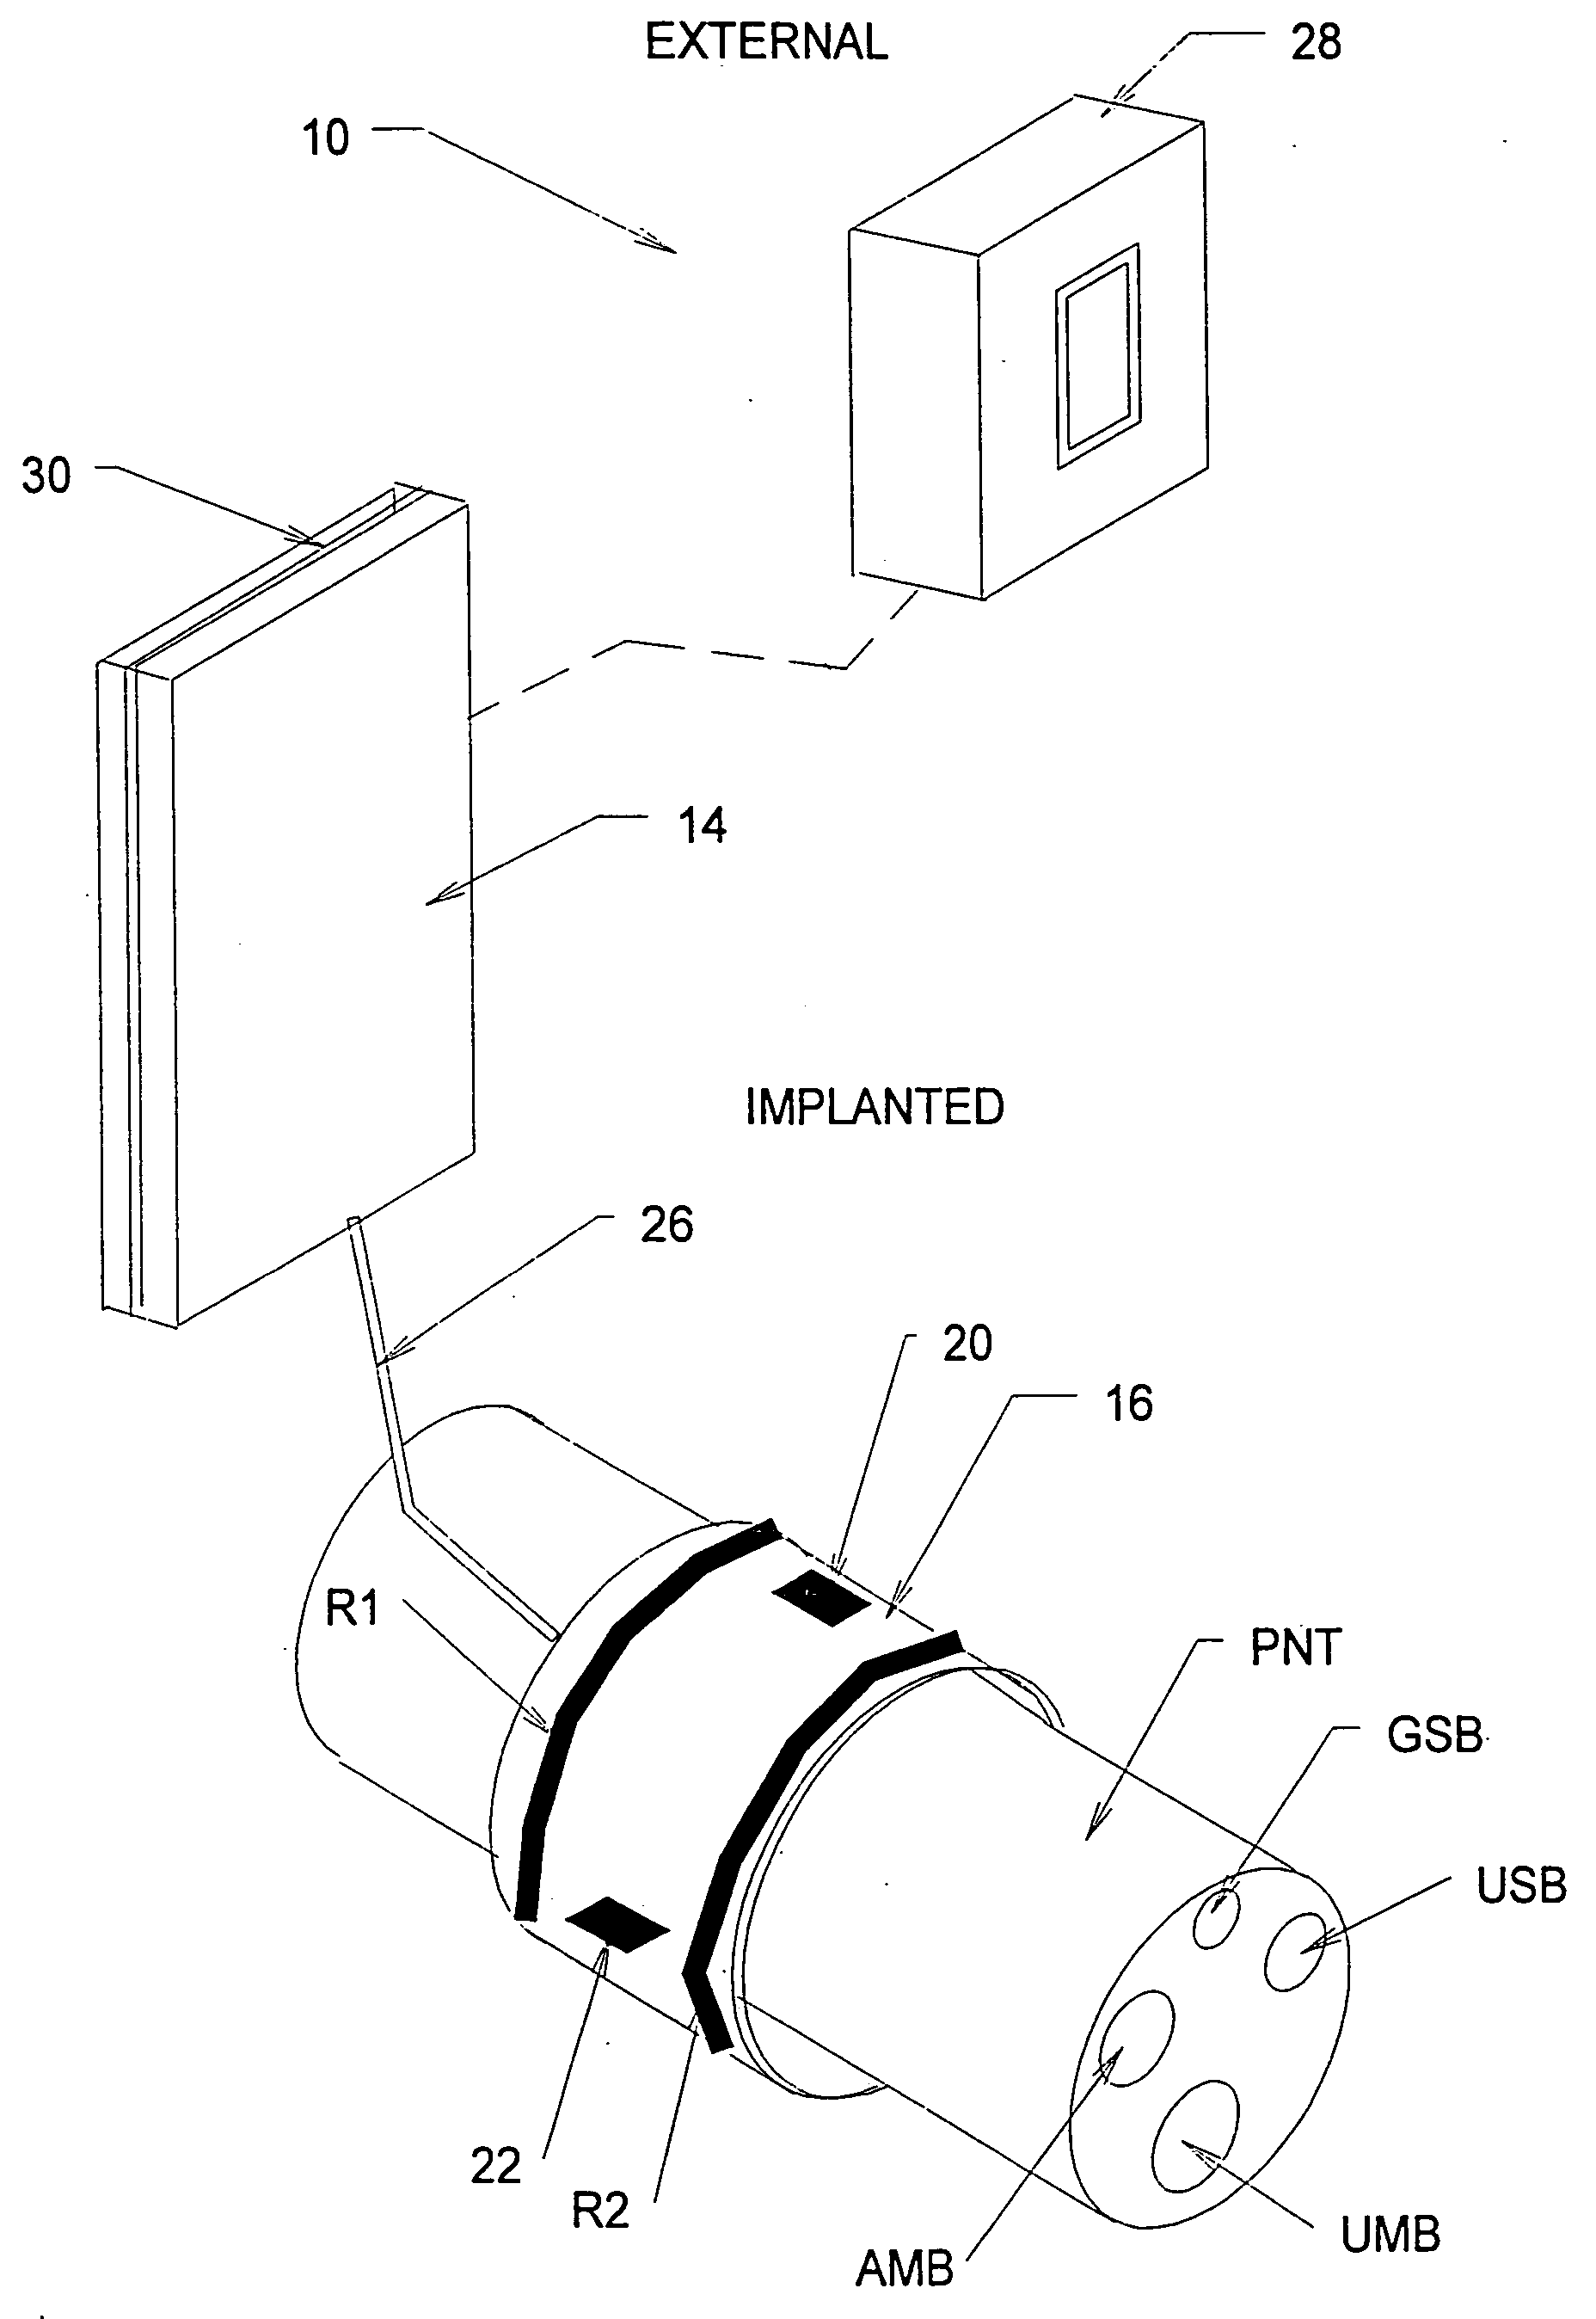 Systems and methods for selectively stimulating components in, on, or near the pudendal nerve or its branches to achieve selective physiologic responses